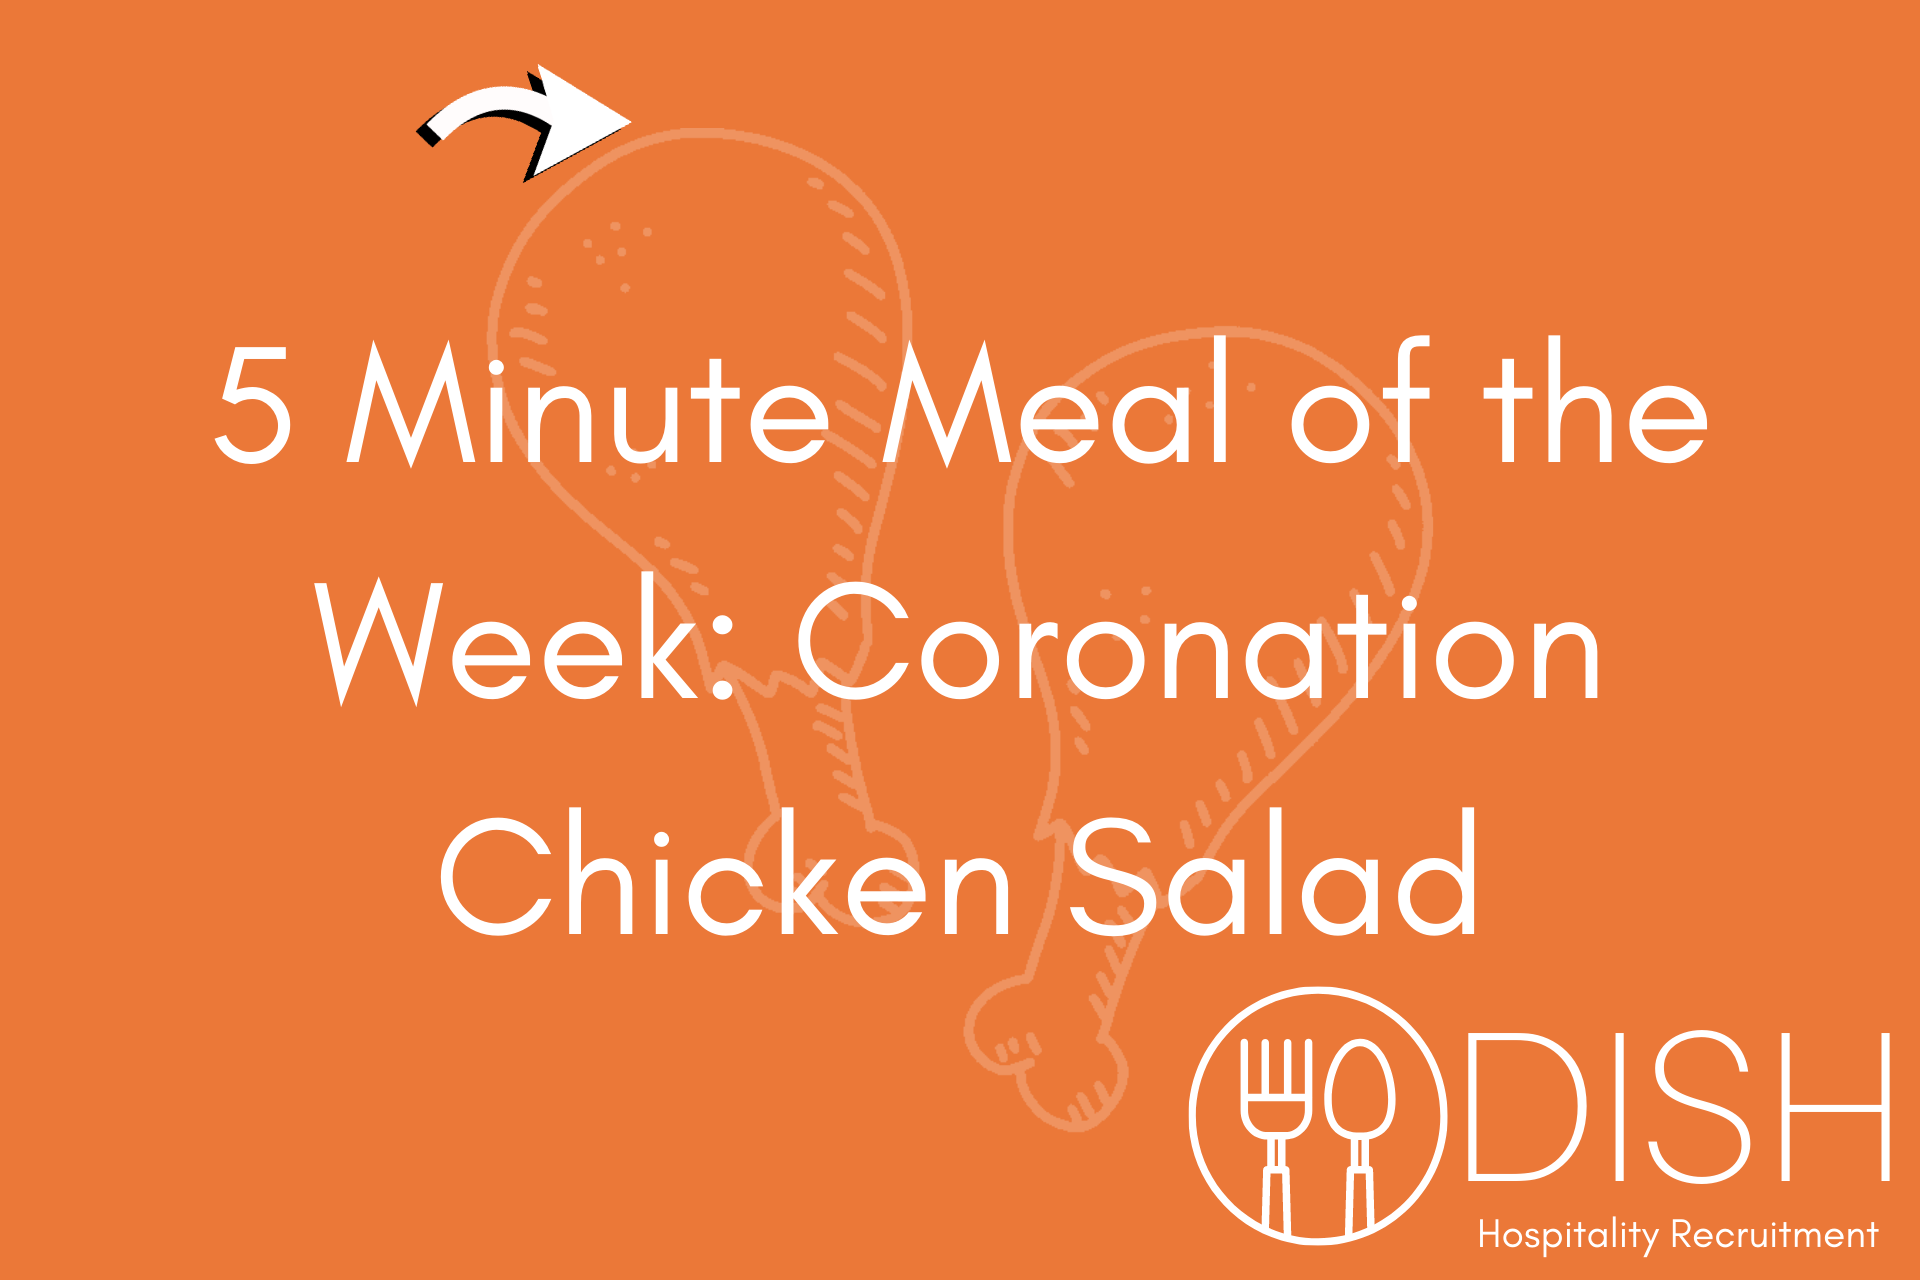 5 Minute Meal of the Week: Coronation Chicken Salad